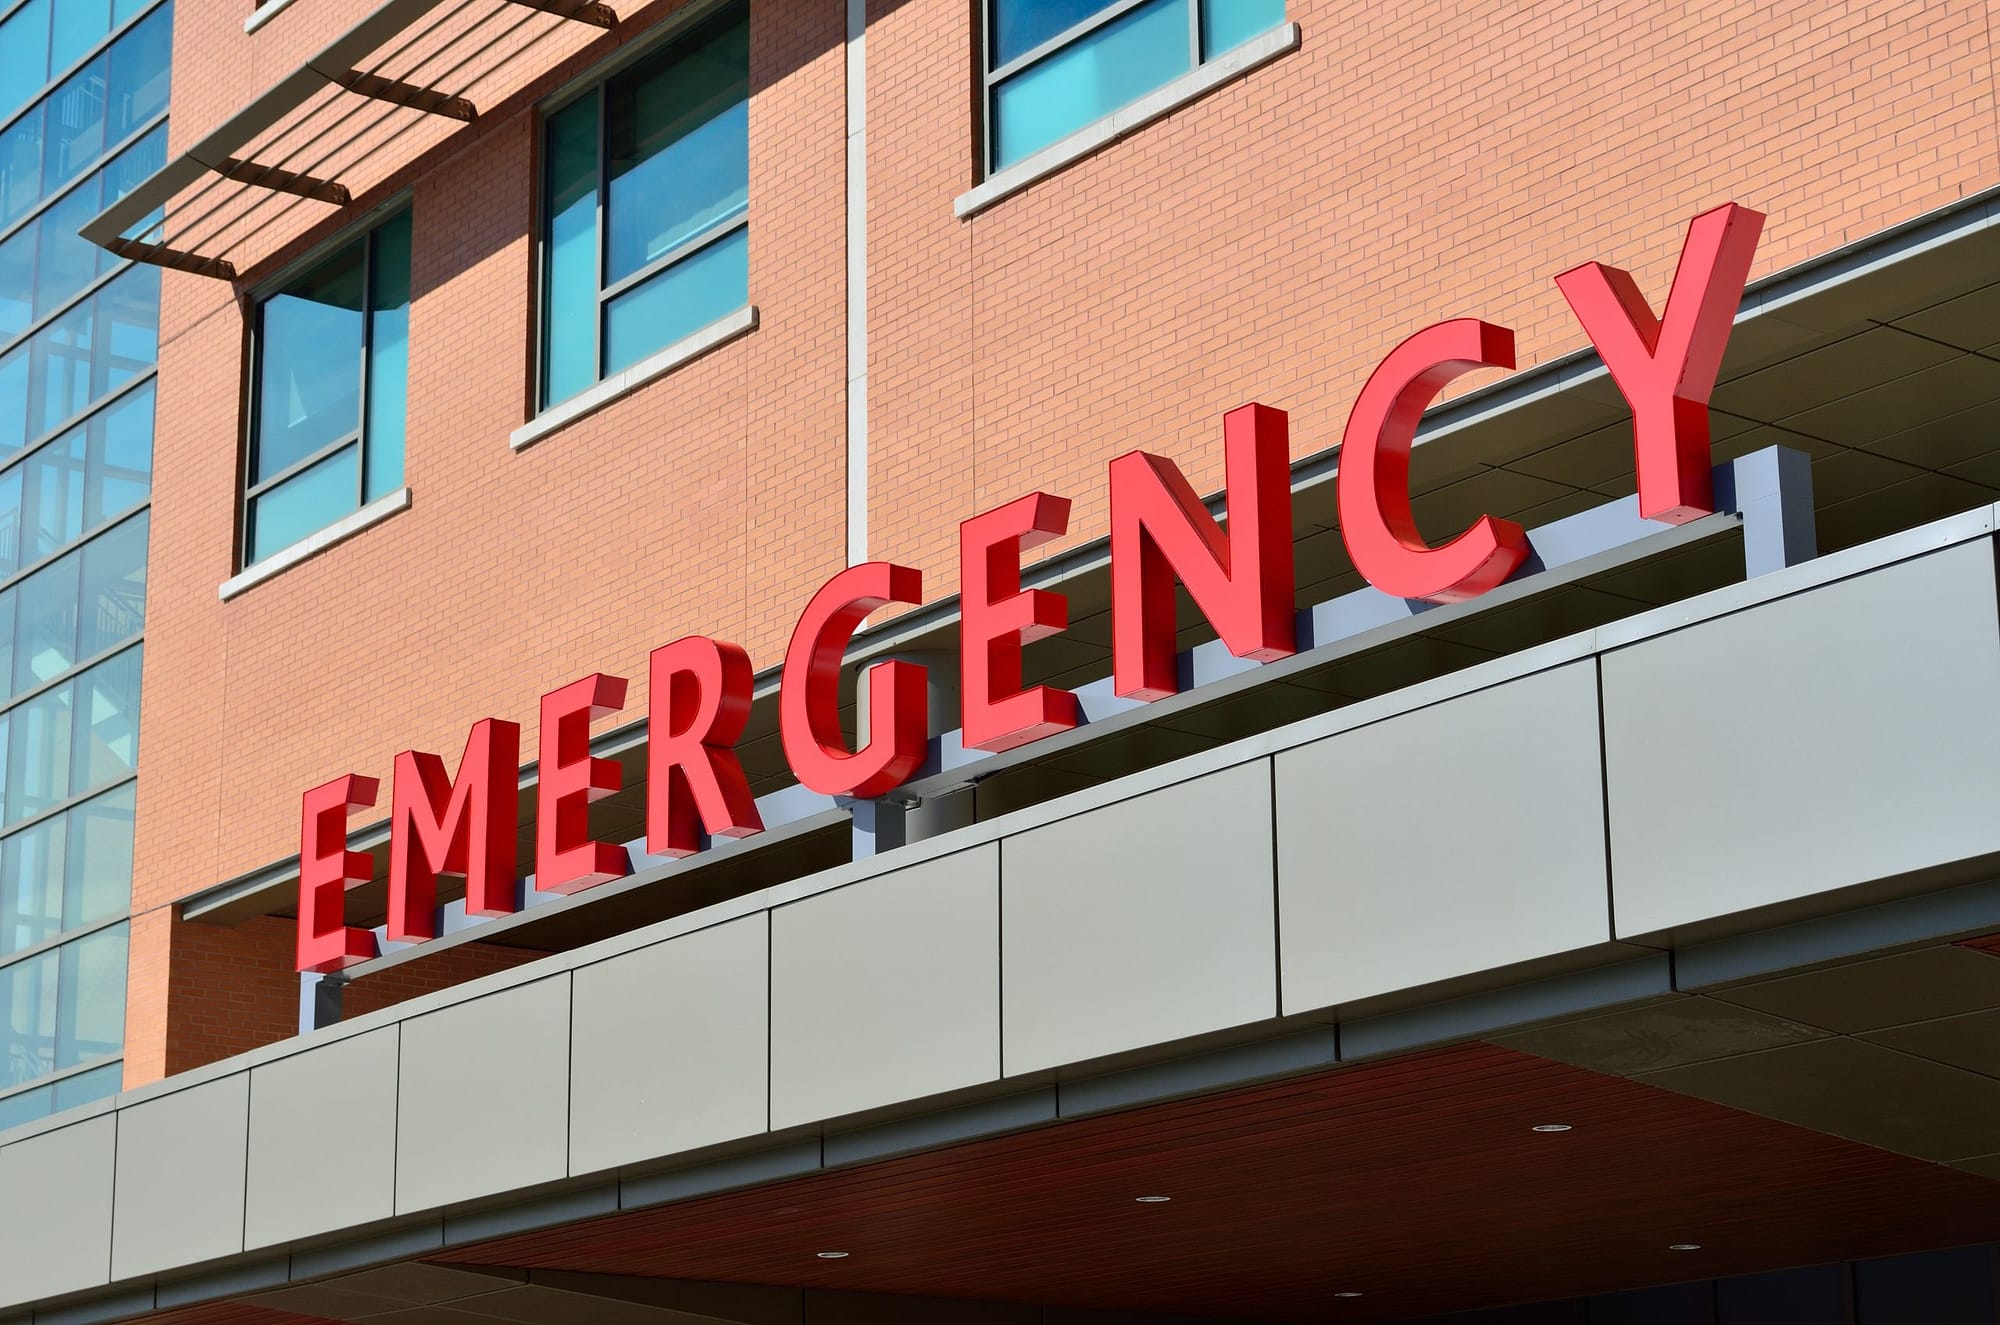 A Hospital's emergency department